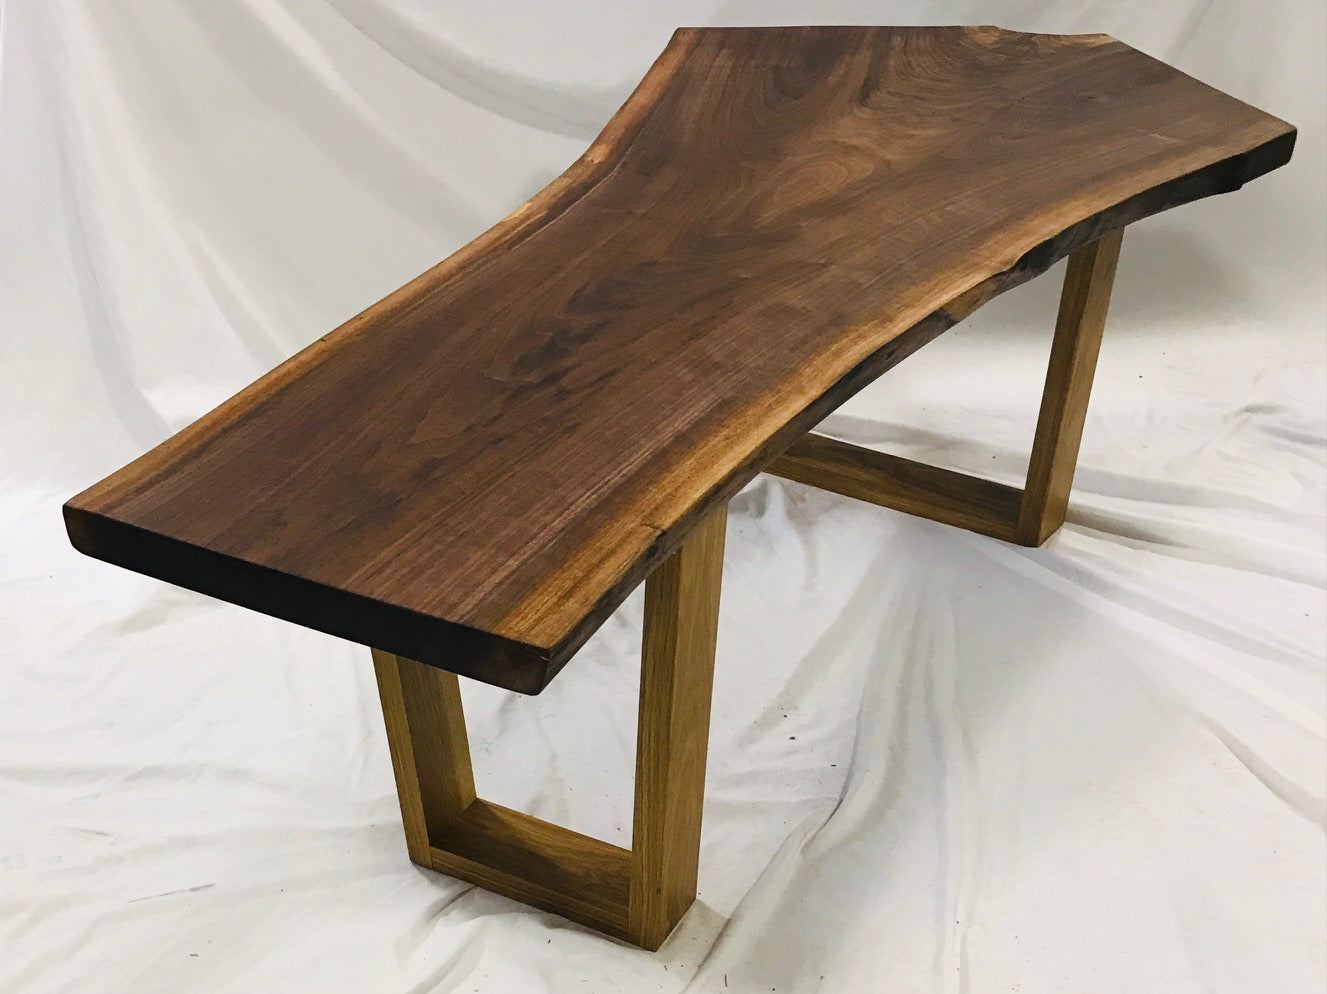 live edge walnut coffee table -45degree view- narrow end opposite crotch feature